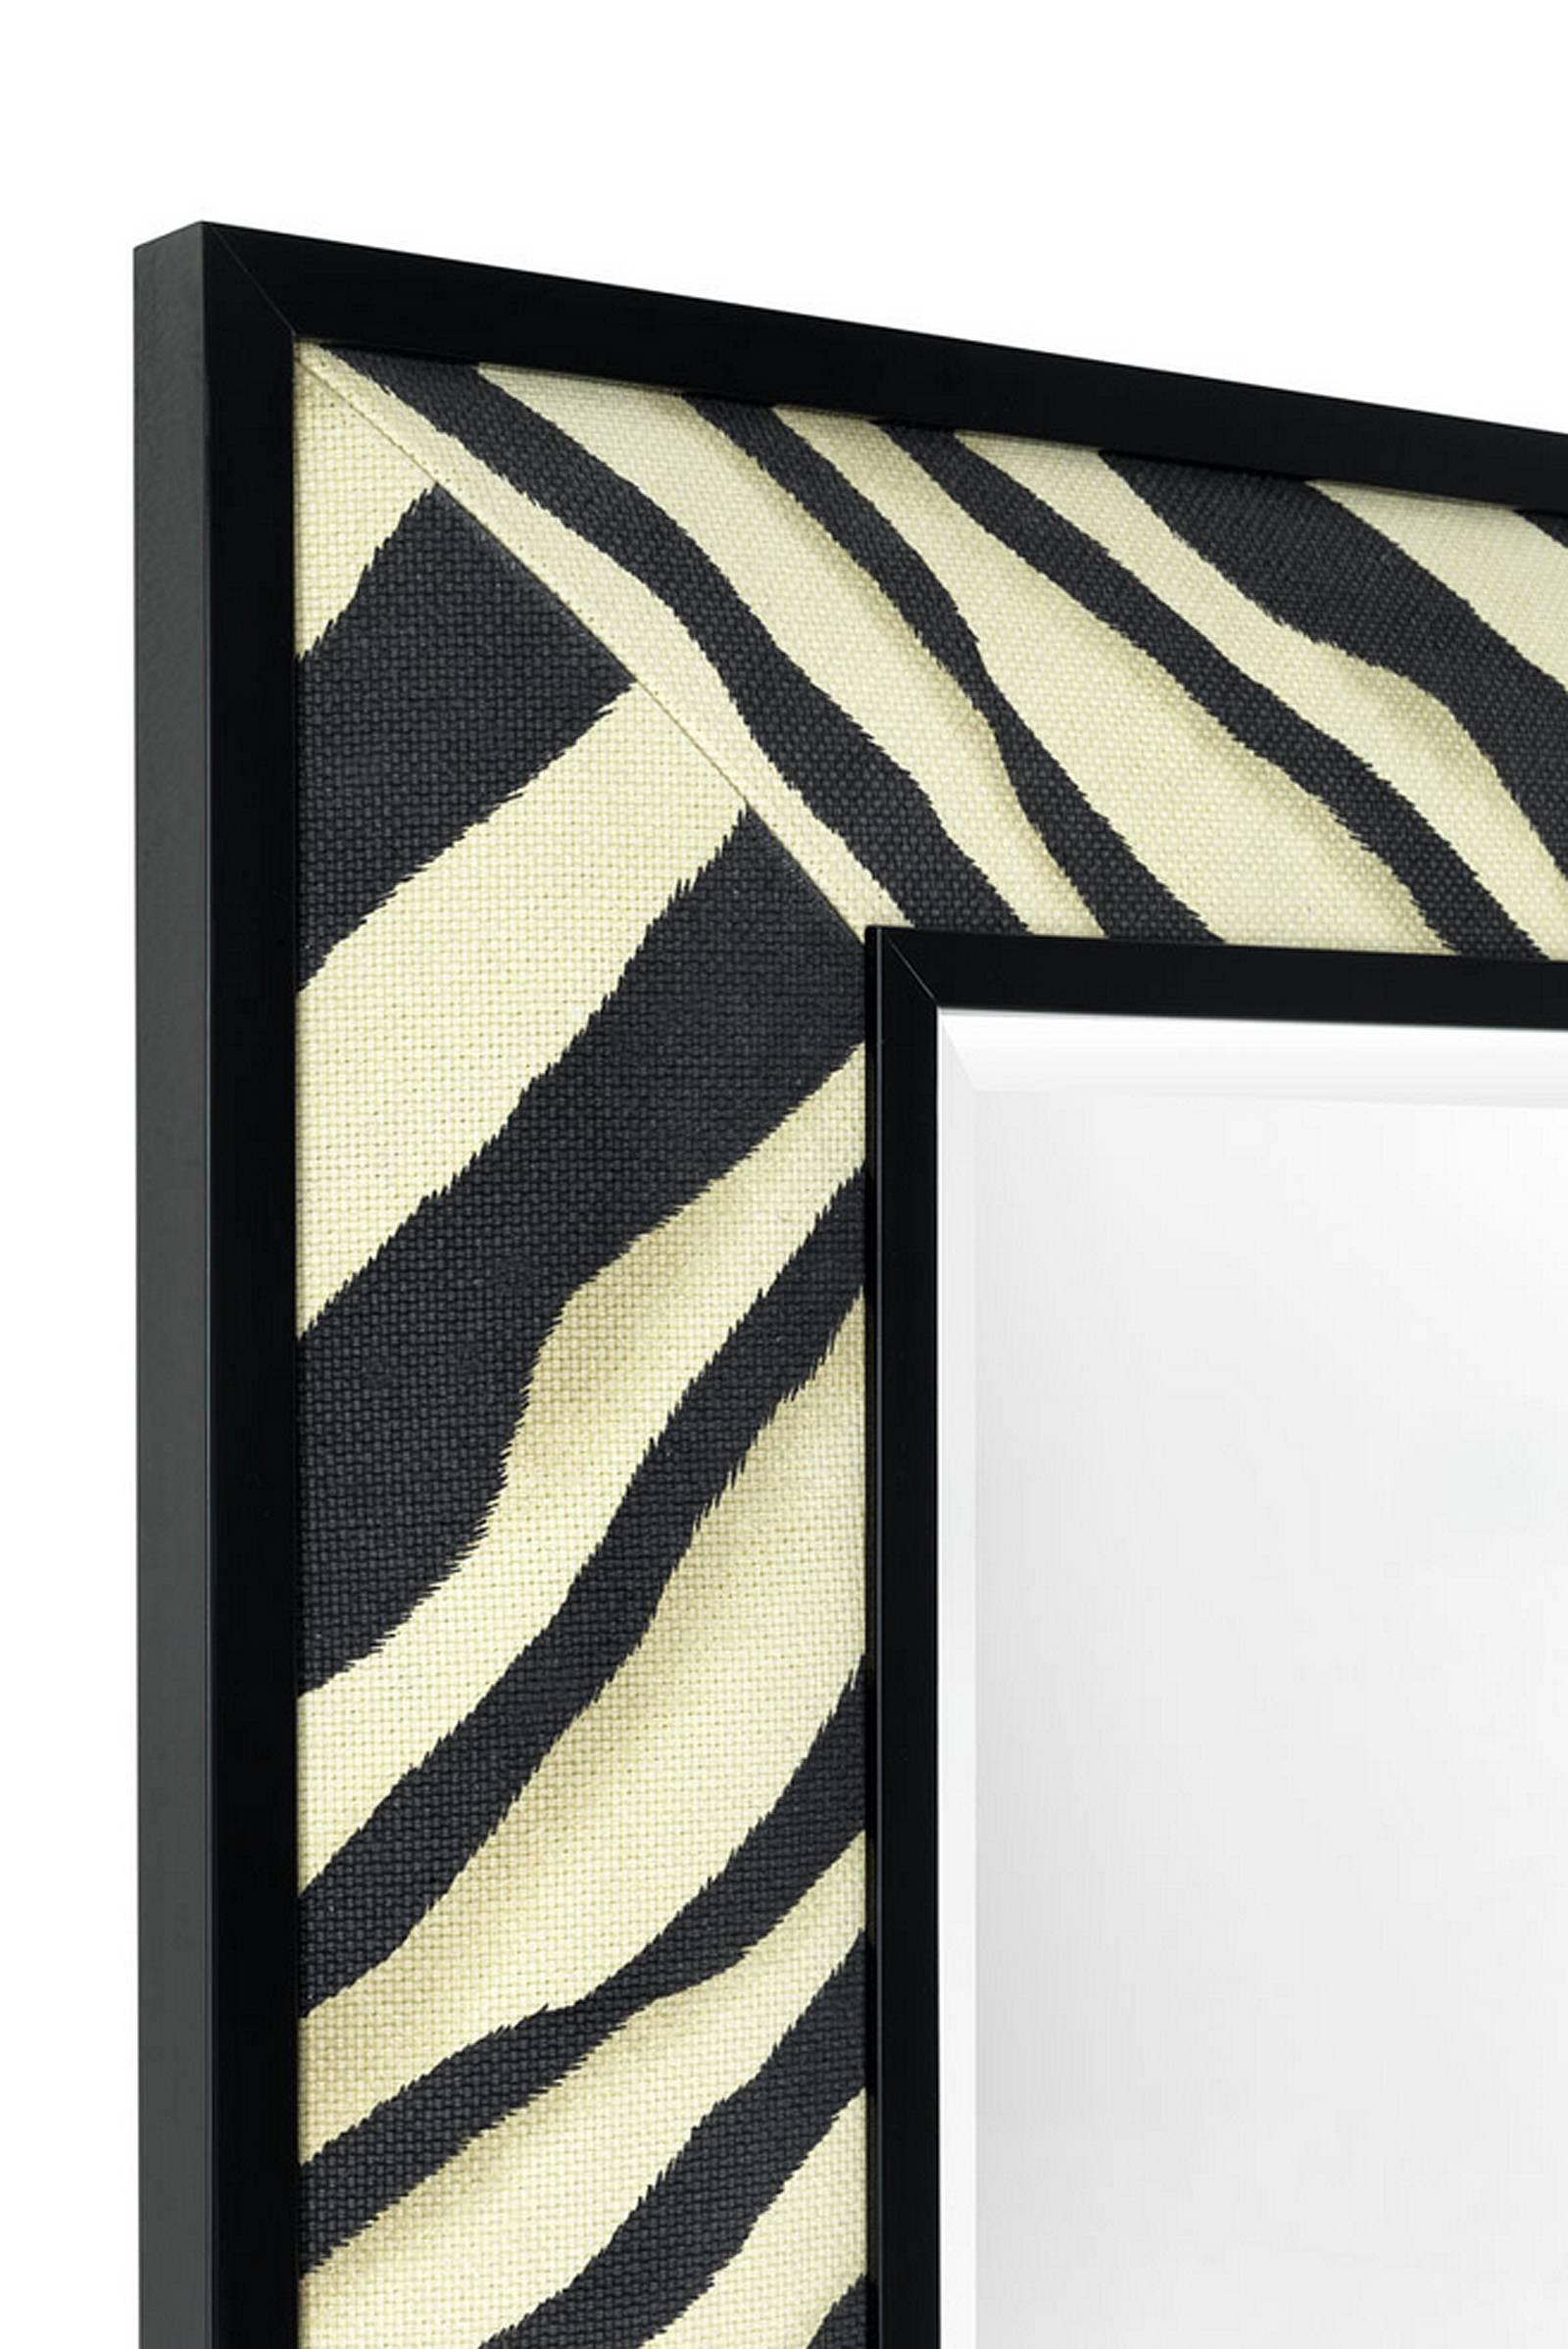 Mirror zebra with mirror glass and 
black and white frame in fabric with
zebra pattern.
   